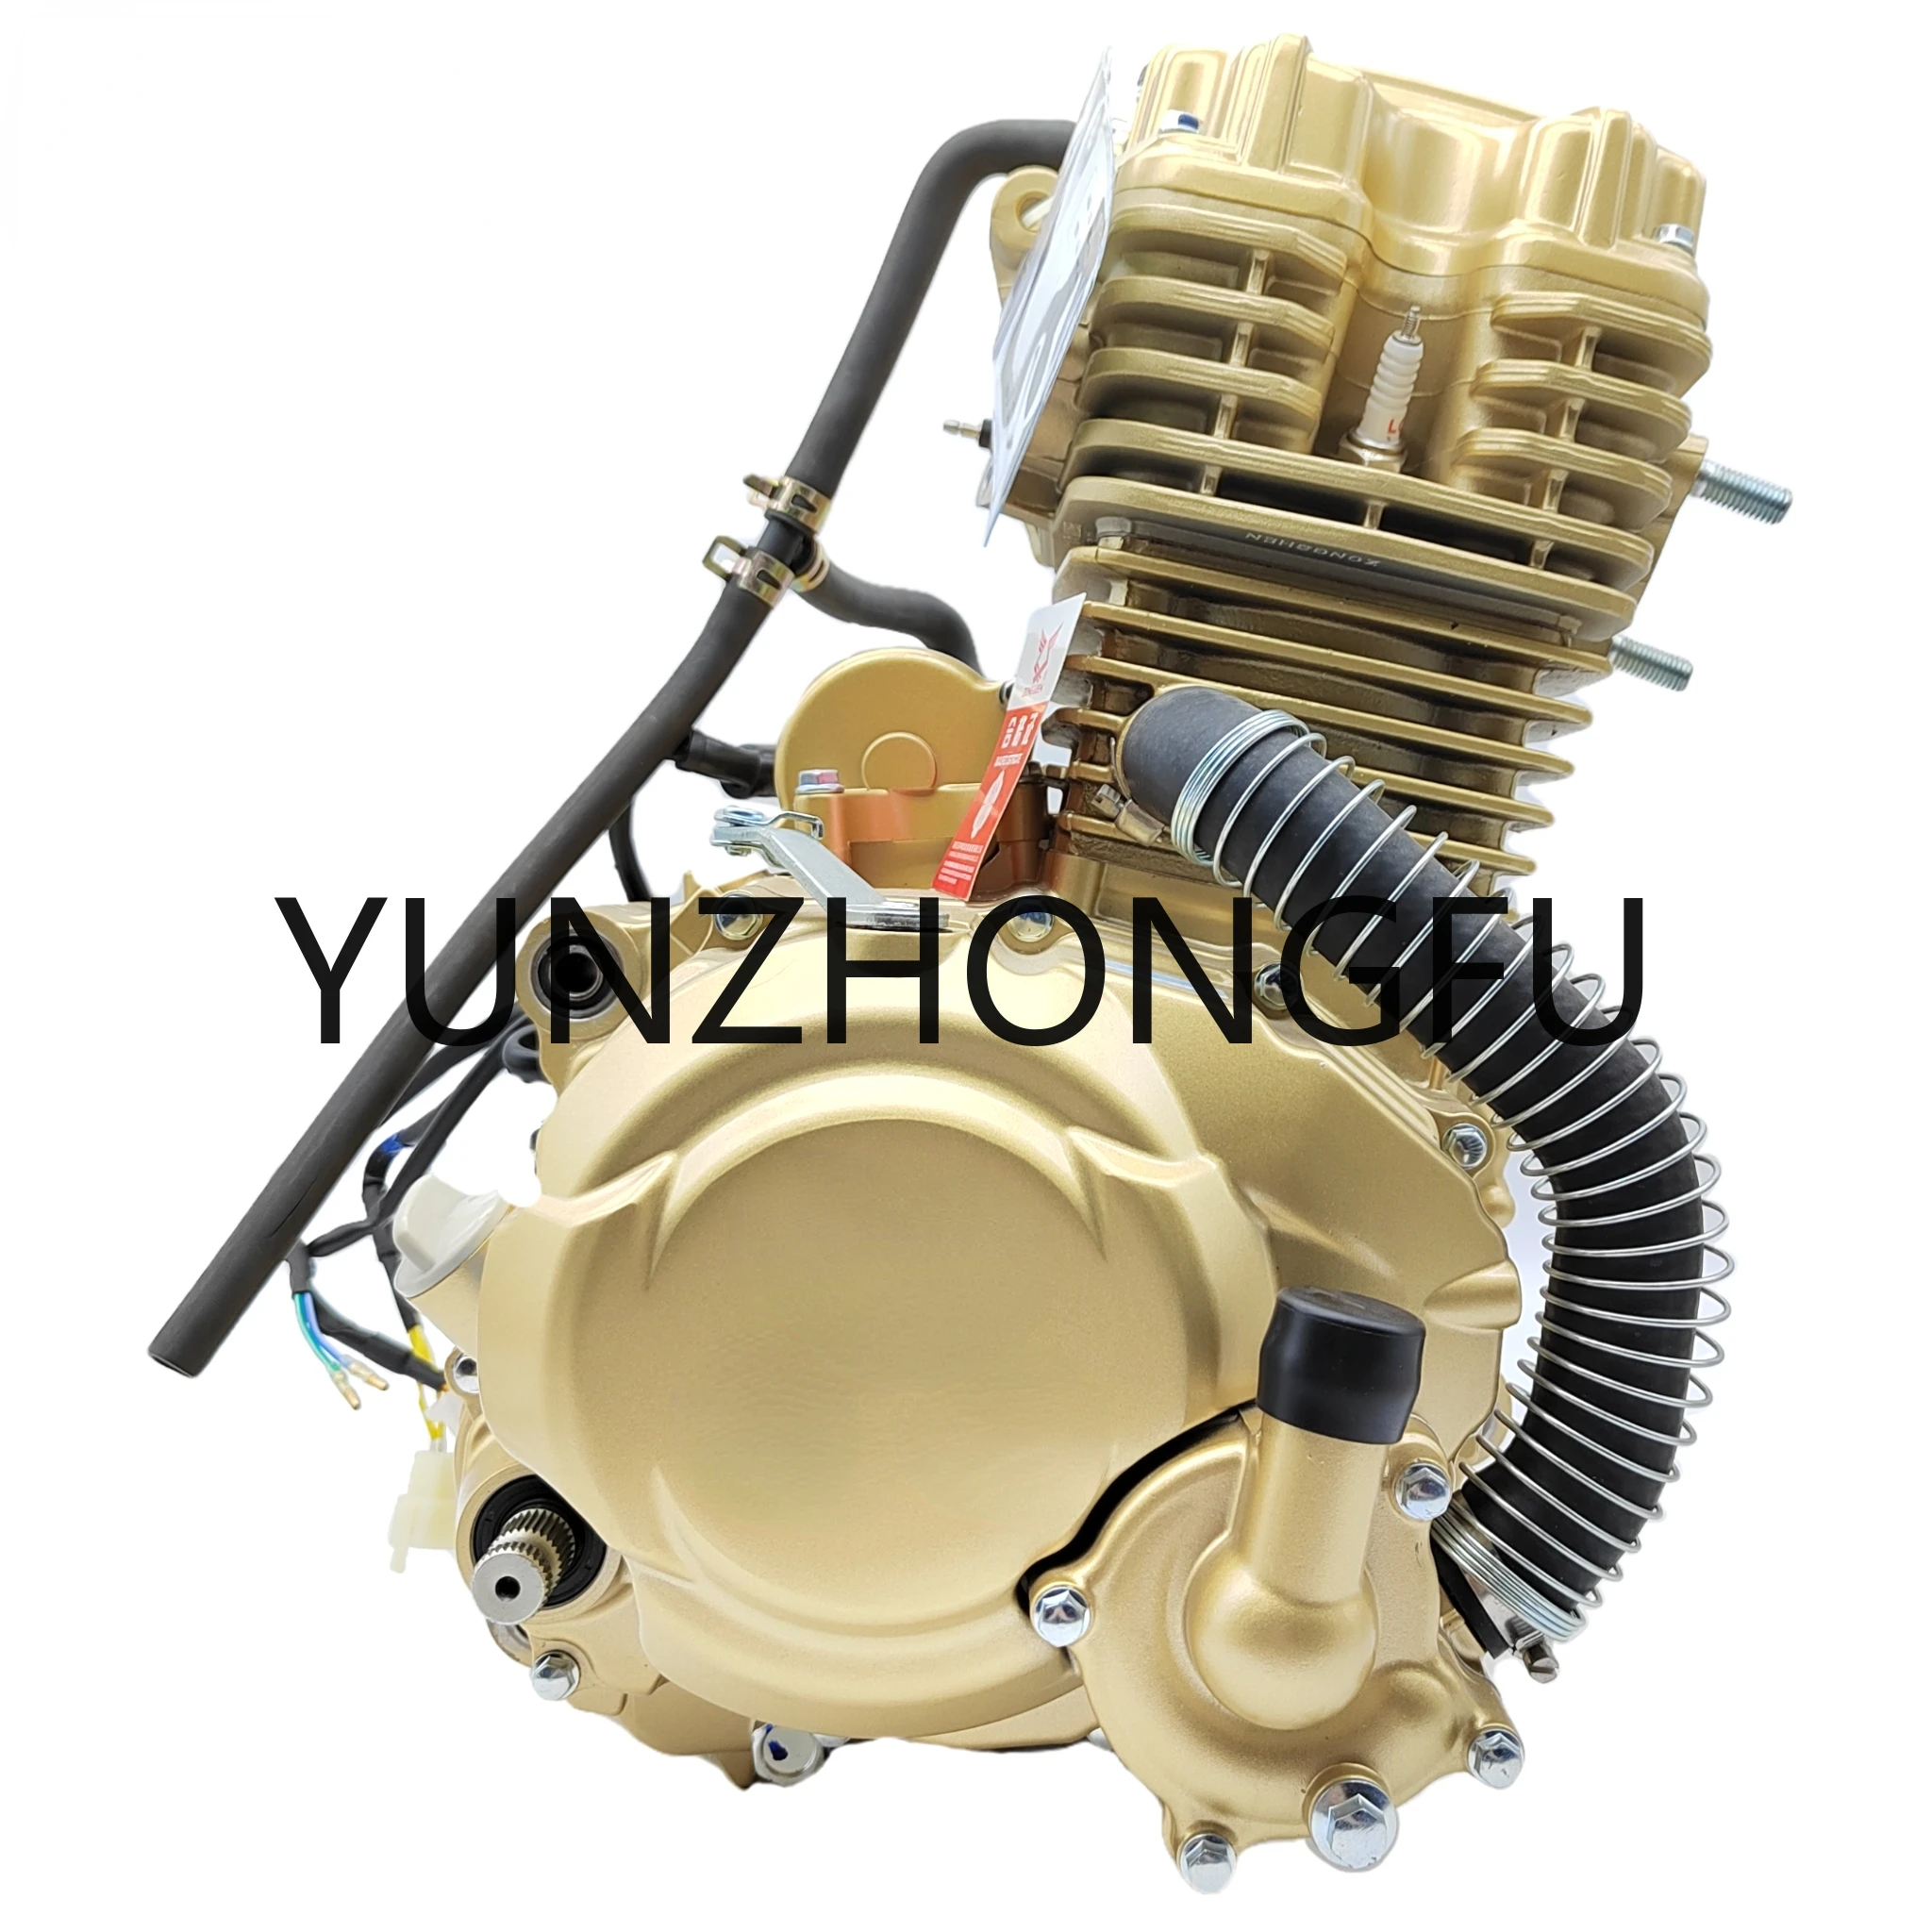 

Engine 300cc Water-cooling 4-stroke Fit for Mini Jeep Atvs/utvs Parts Engine 300cc